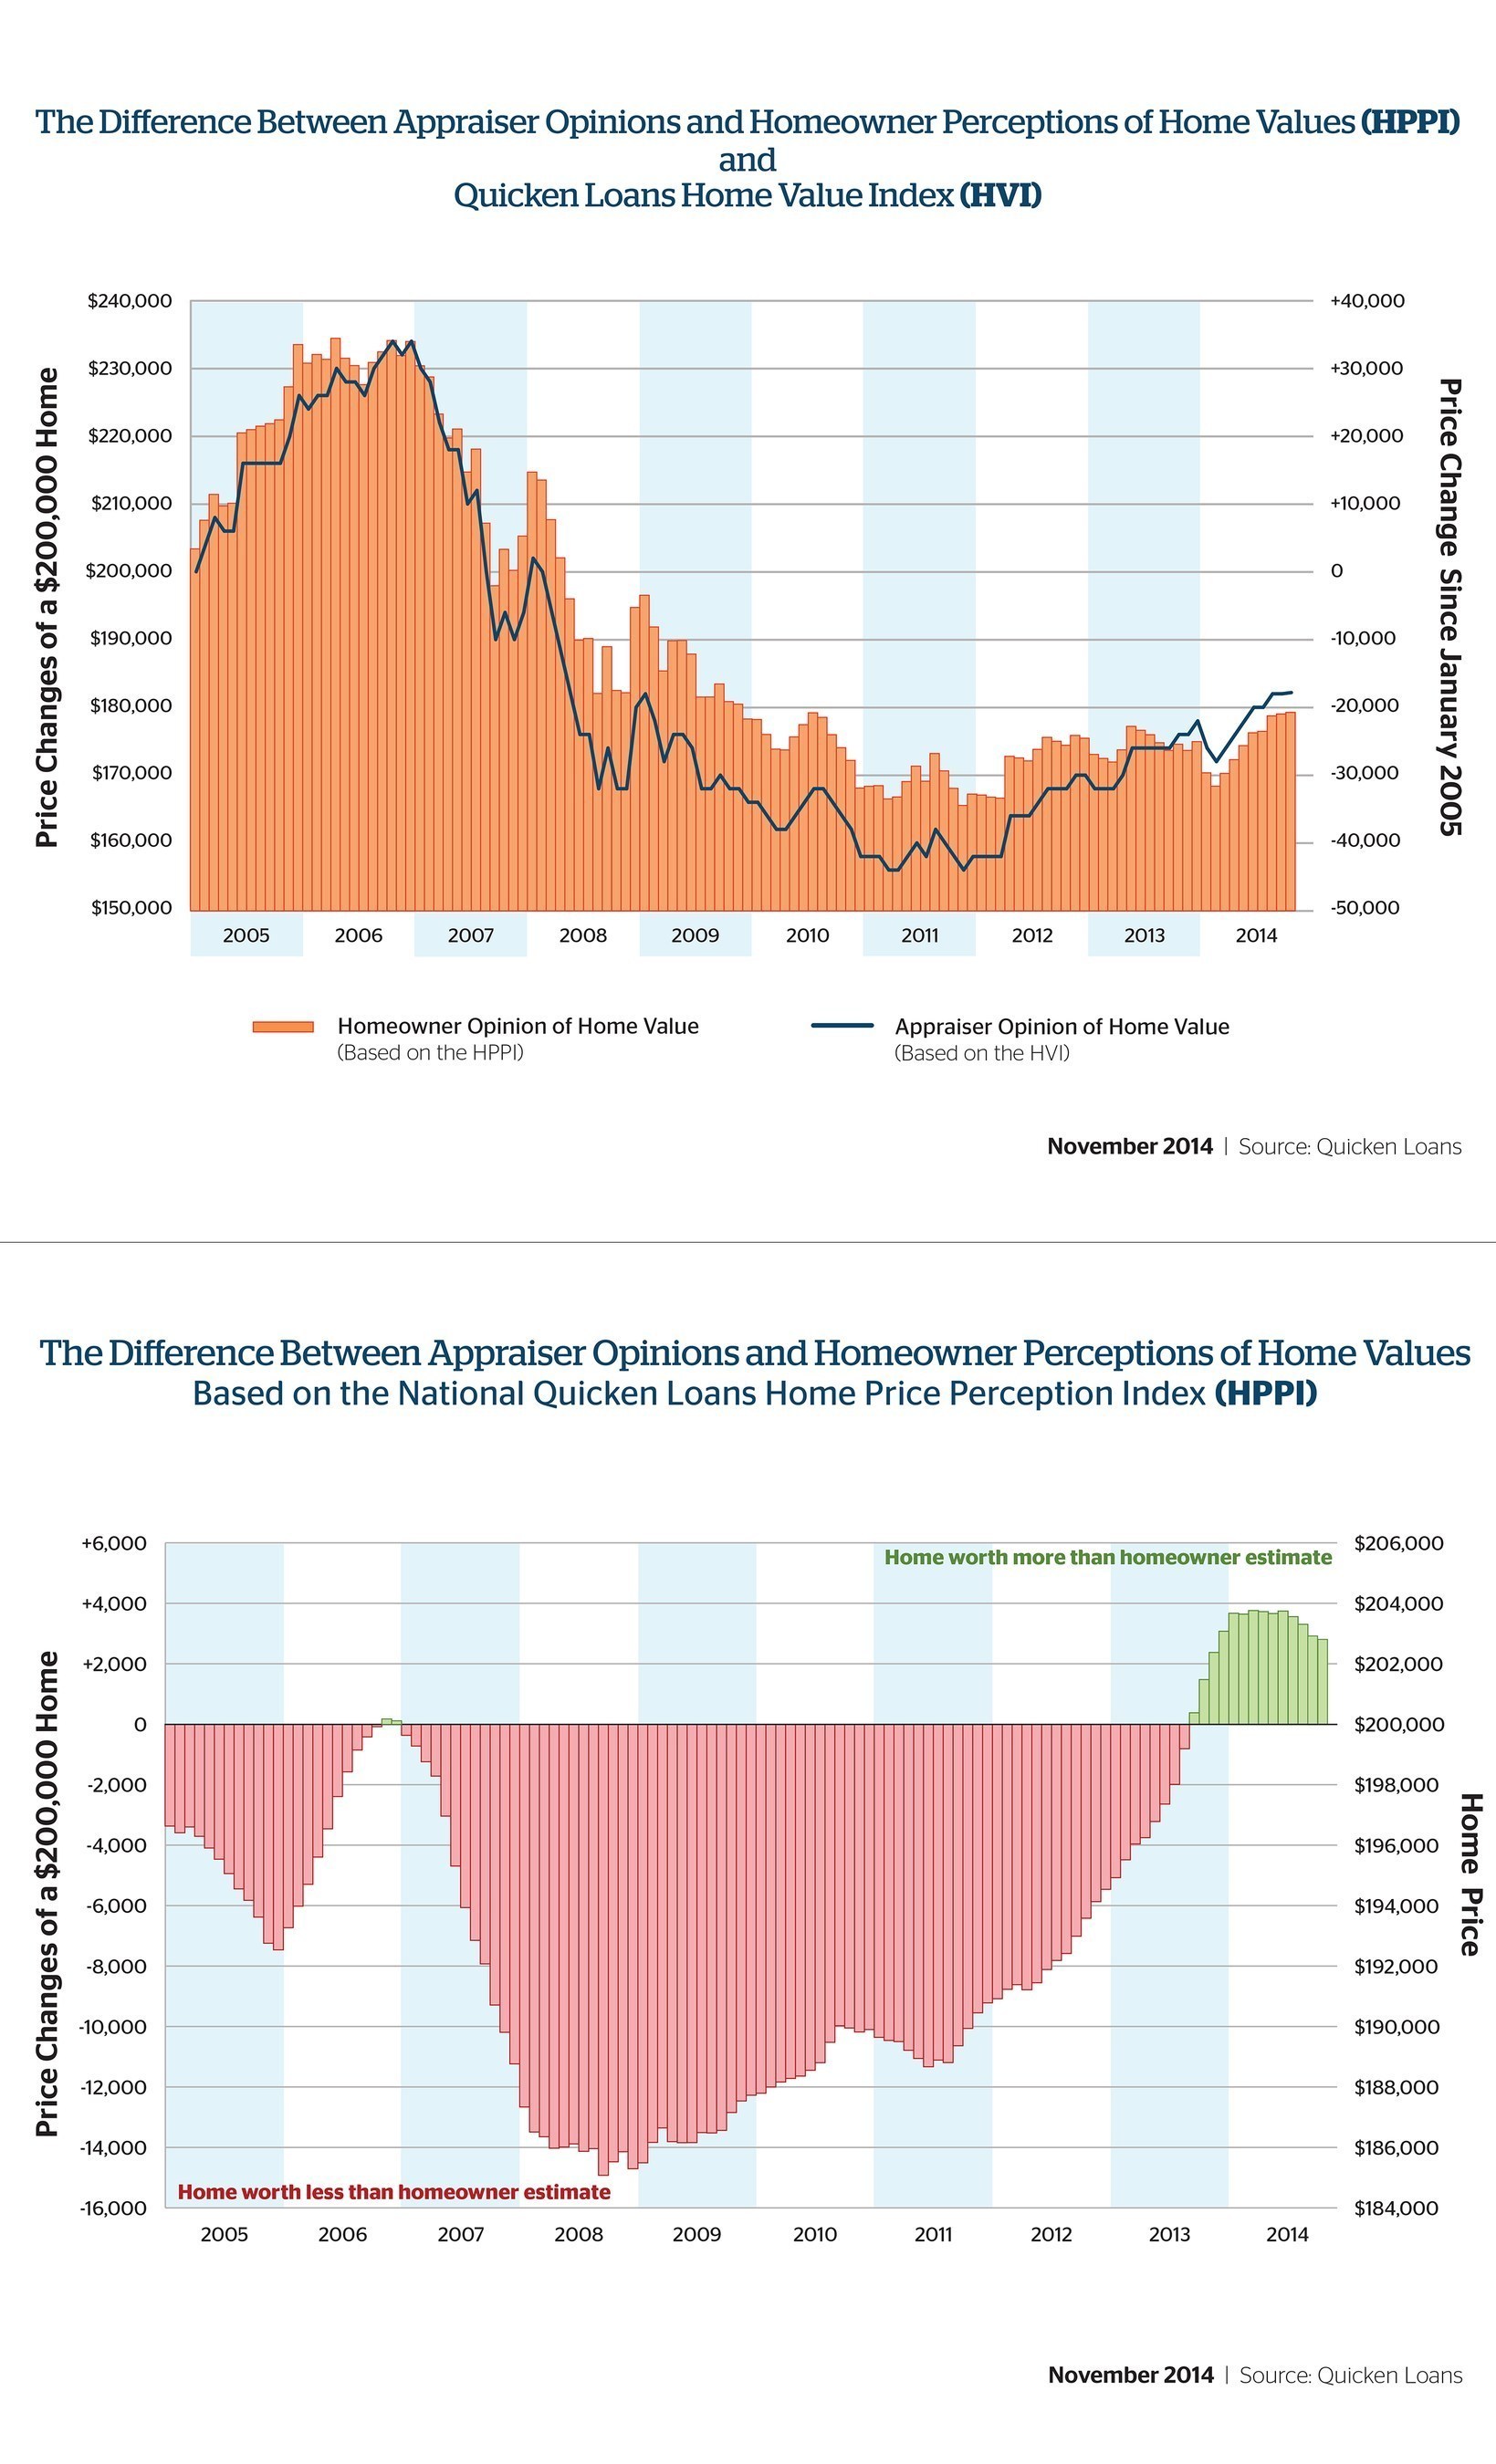 Quicken Loans Home Value Index and Home Price Perception Index - November 2014